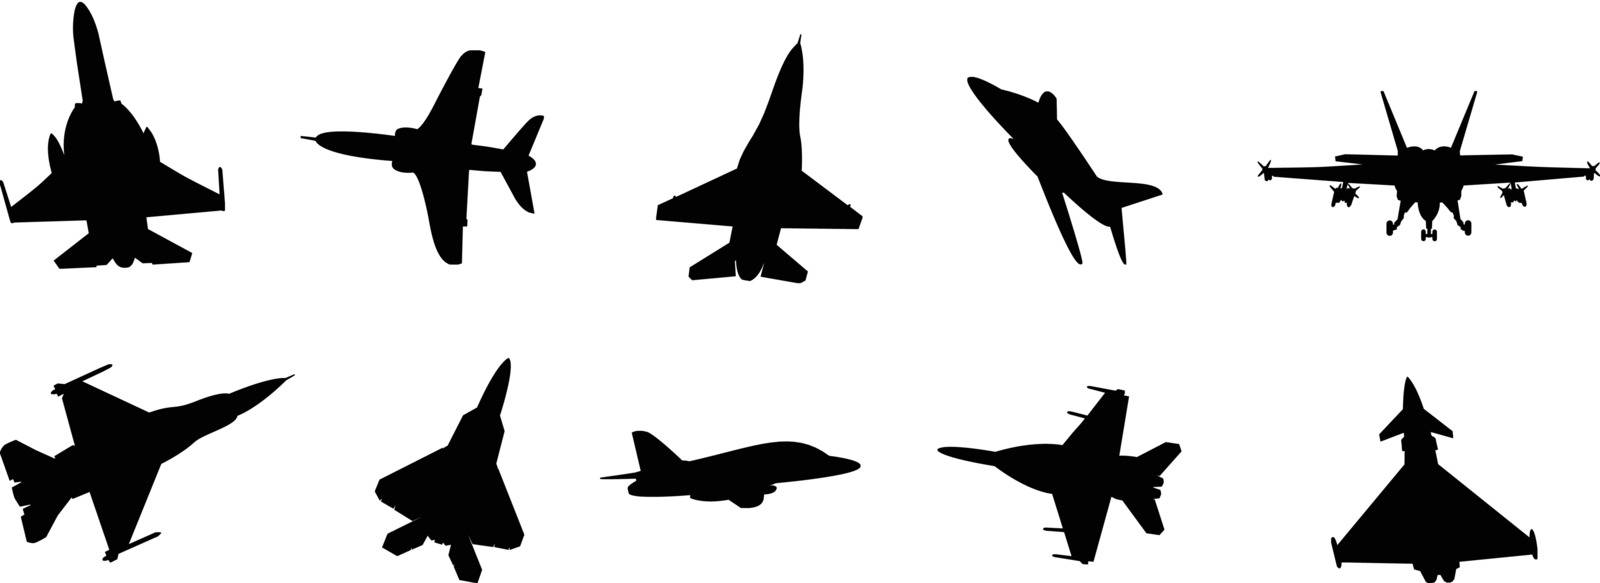 set of military jet silhouette illustrations on white